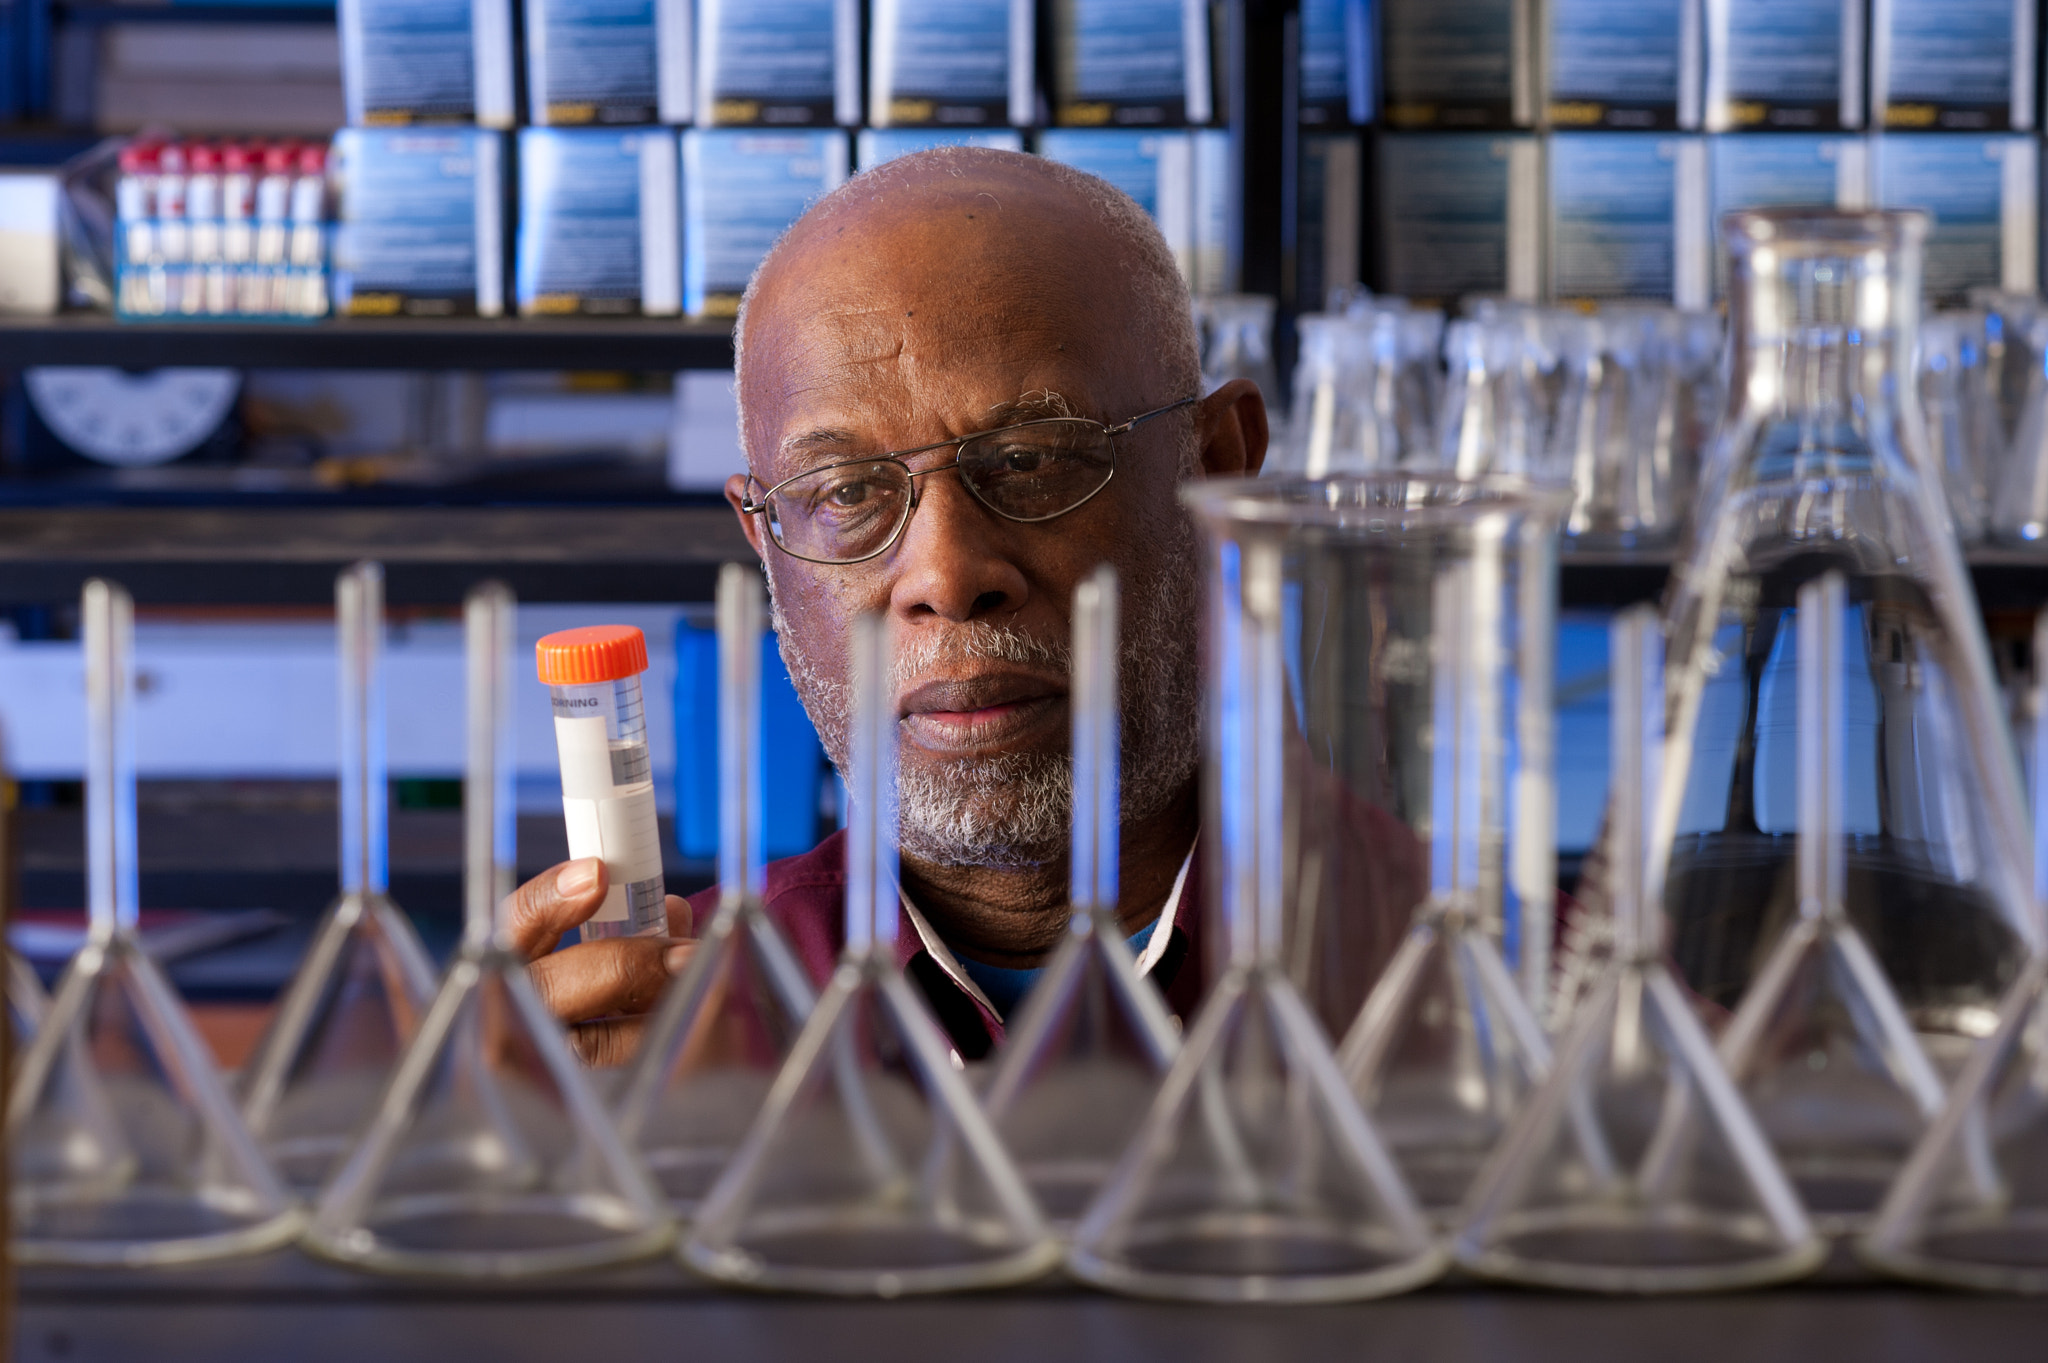 Nikon D700 sample photo. Researcher in a lab studying a sample photography